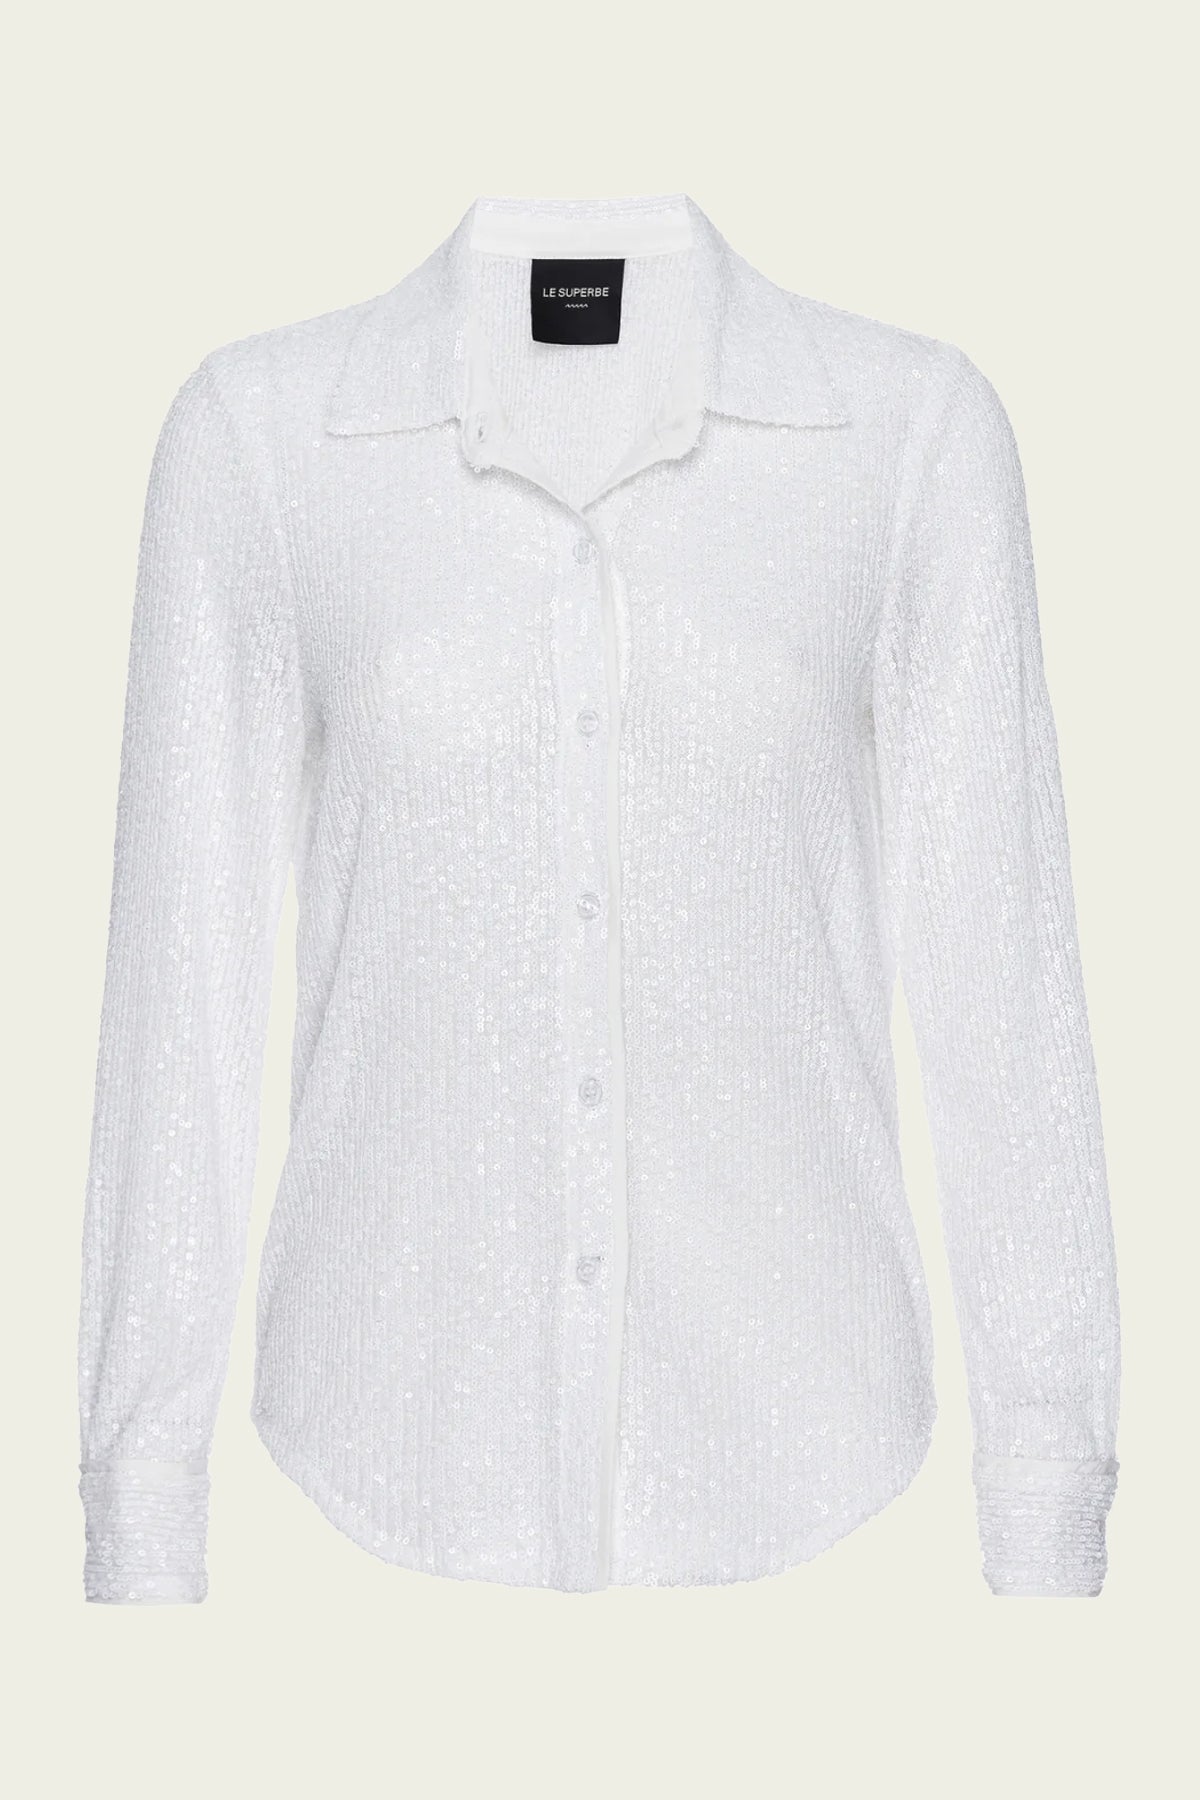 Forever Yours Boyfriend Shirt in White - shop-olivia.com